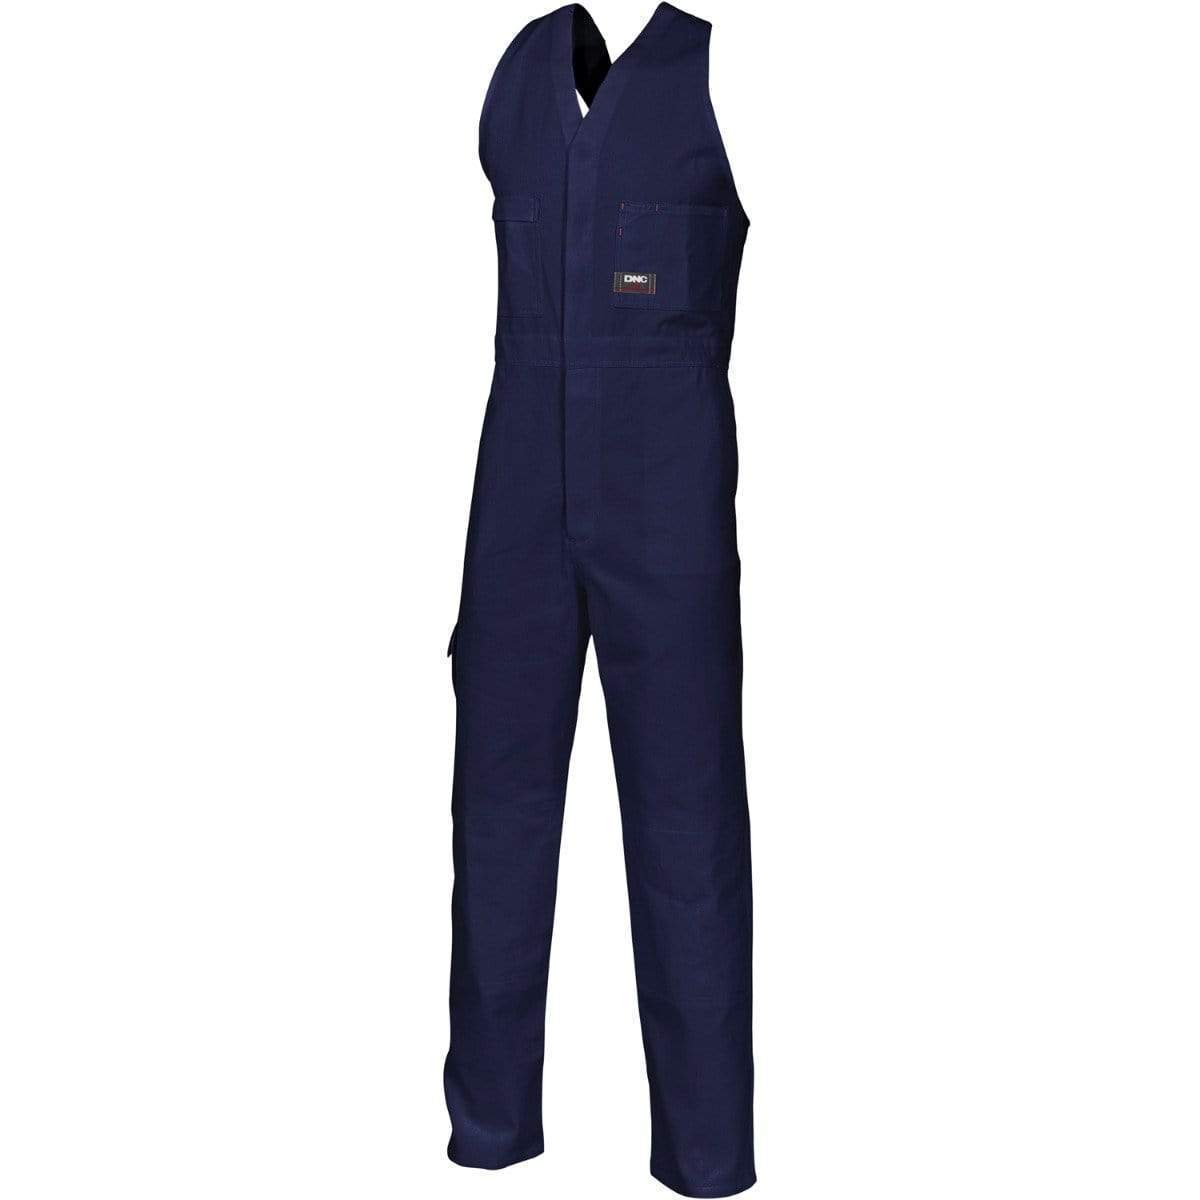 DNC Workwear Work Wear Navy / 77R DNC WORKWEAR Cotton Drill Action Back Overall 3121